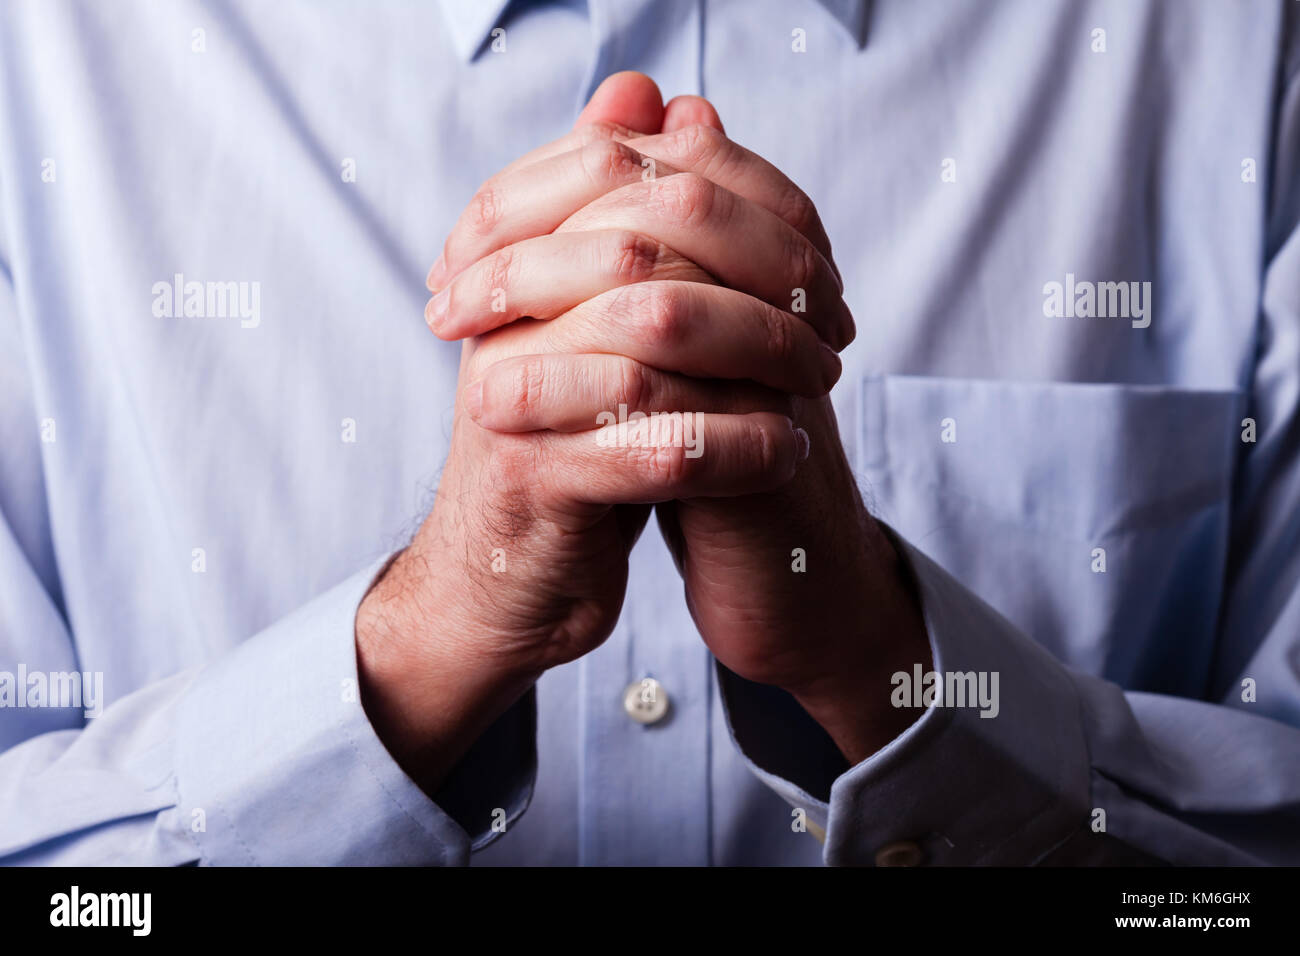 Close up or closeup of hands of faithful mature man praying. Hands folded, interlaced fingers in worship to god. Concept for religion, faith, prayer a Stock Photo